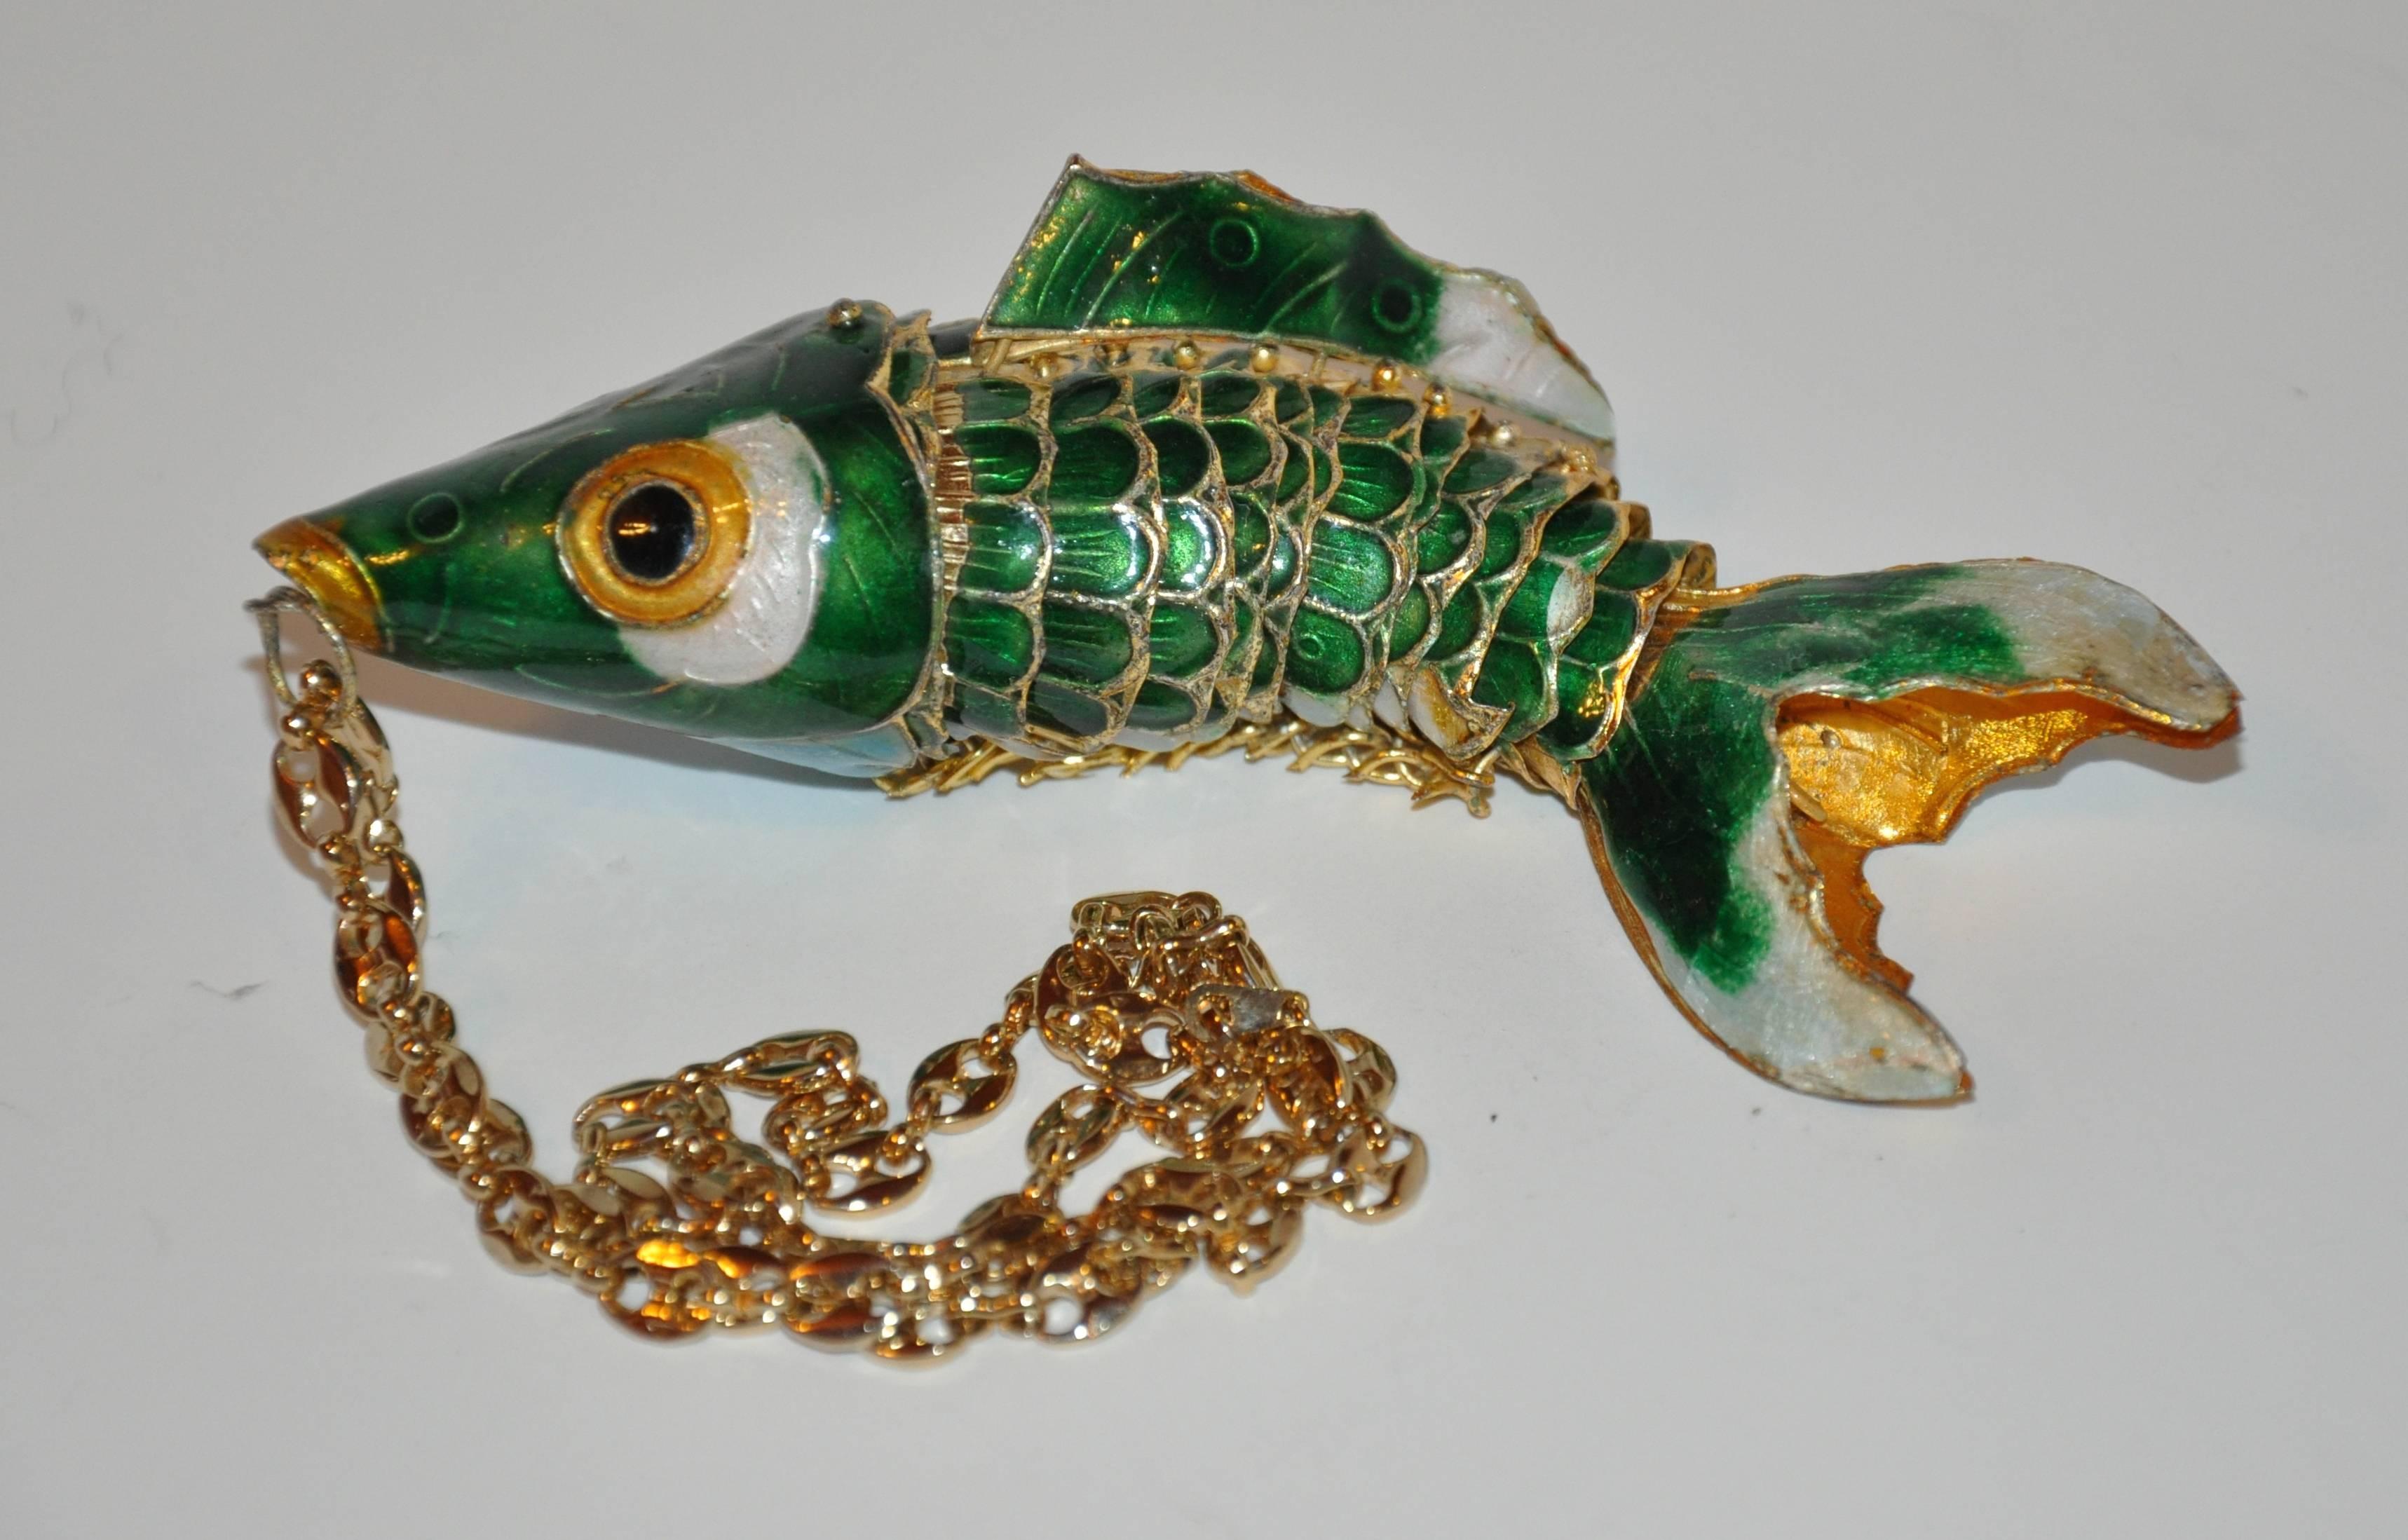 This wonderful whimsical large gold-tone hardware with enamel overlay of greens accented with turquoise and white moveable "Lucky Fish" measures 4 1/2" in length, 1 1/2" in width as well as 1 1/2" in depth. The gold-tone